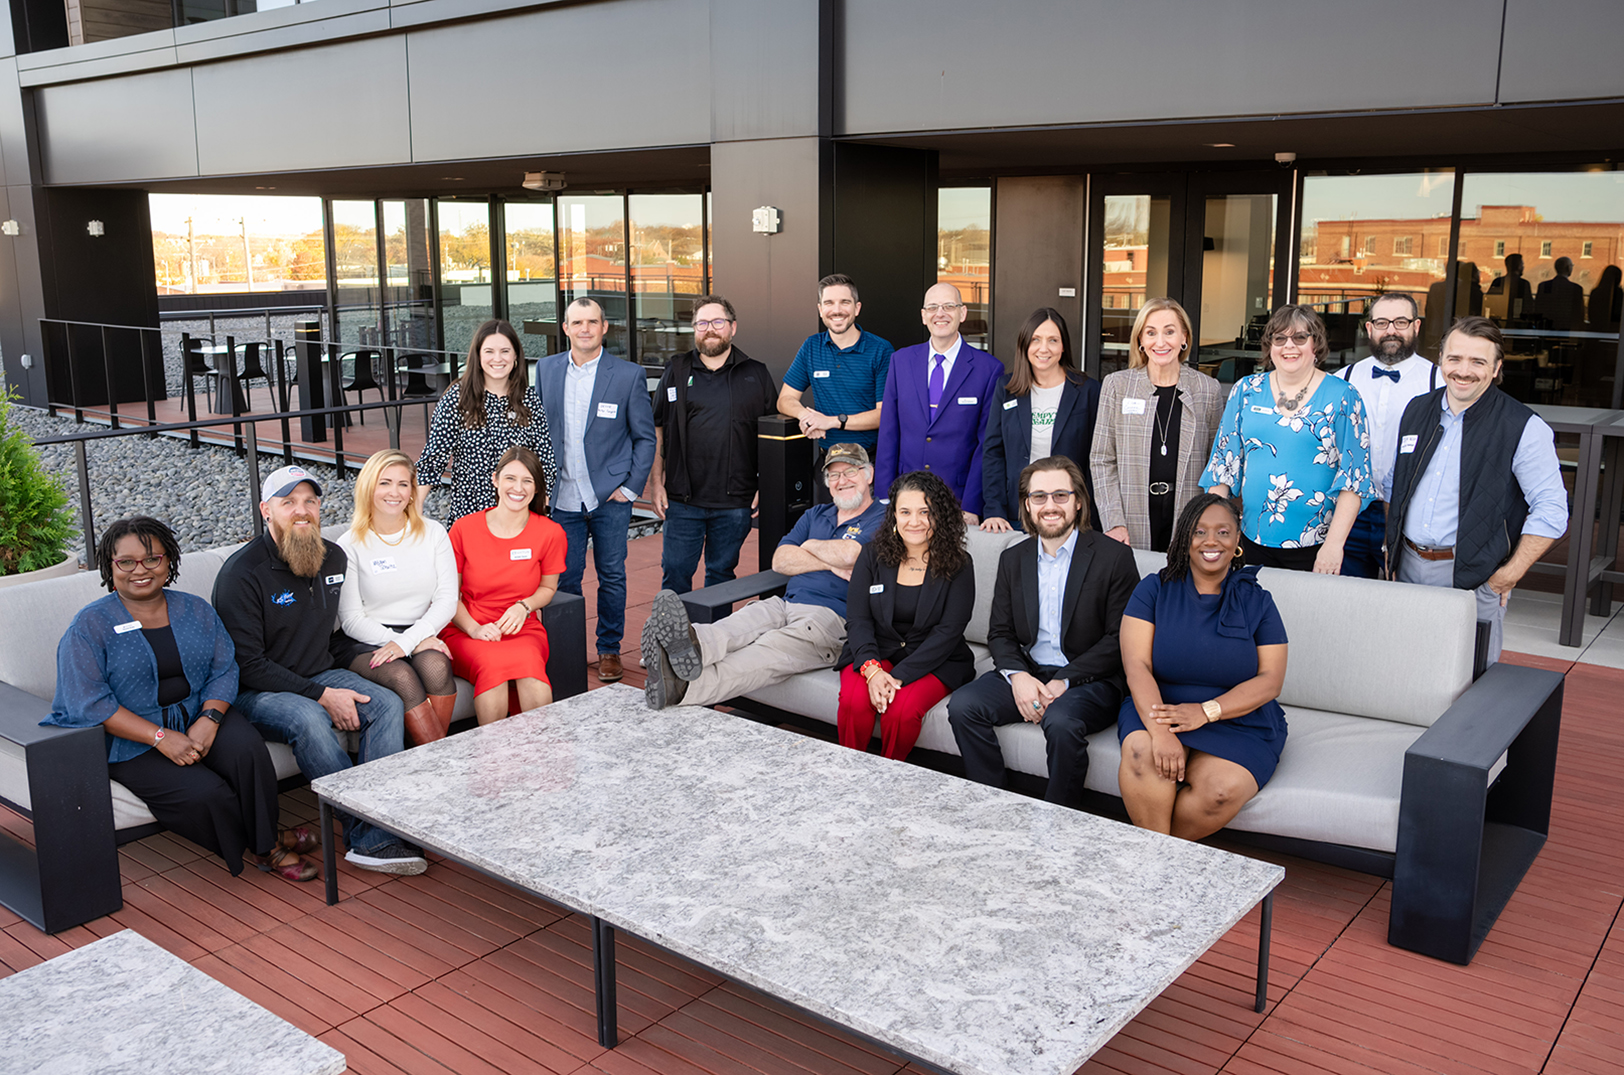 This Wichita program is helping KC startups connect the dots to corporate partners